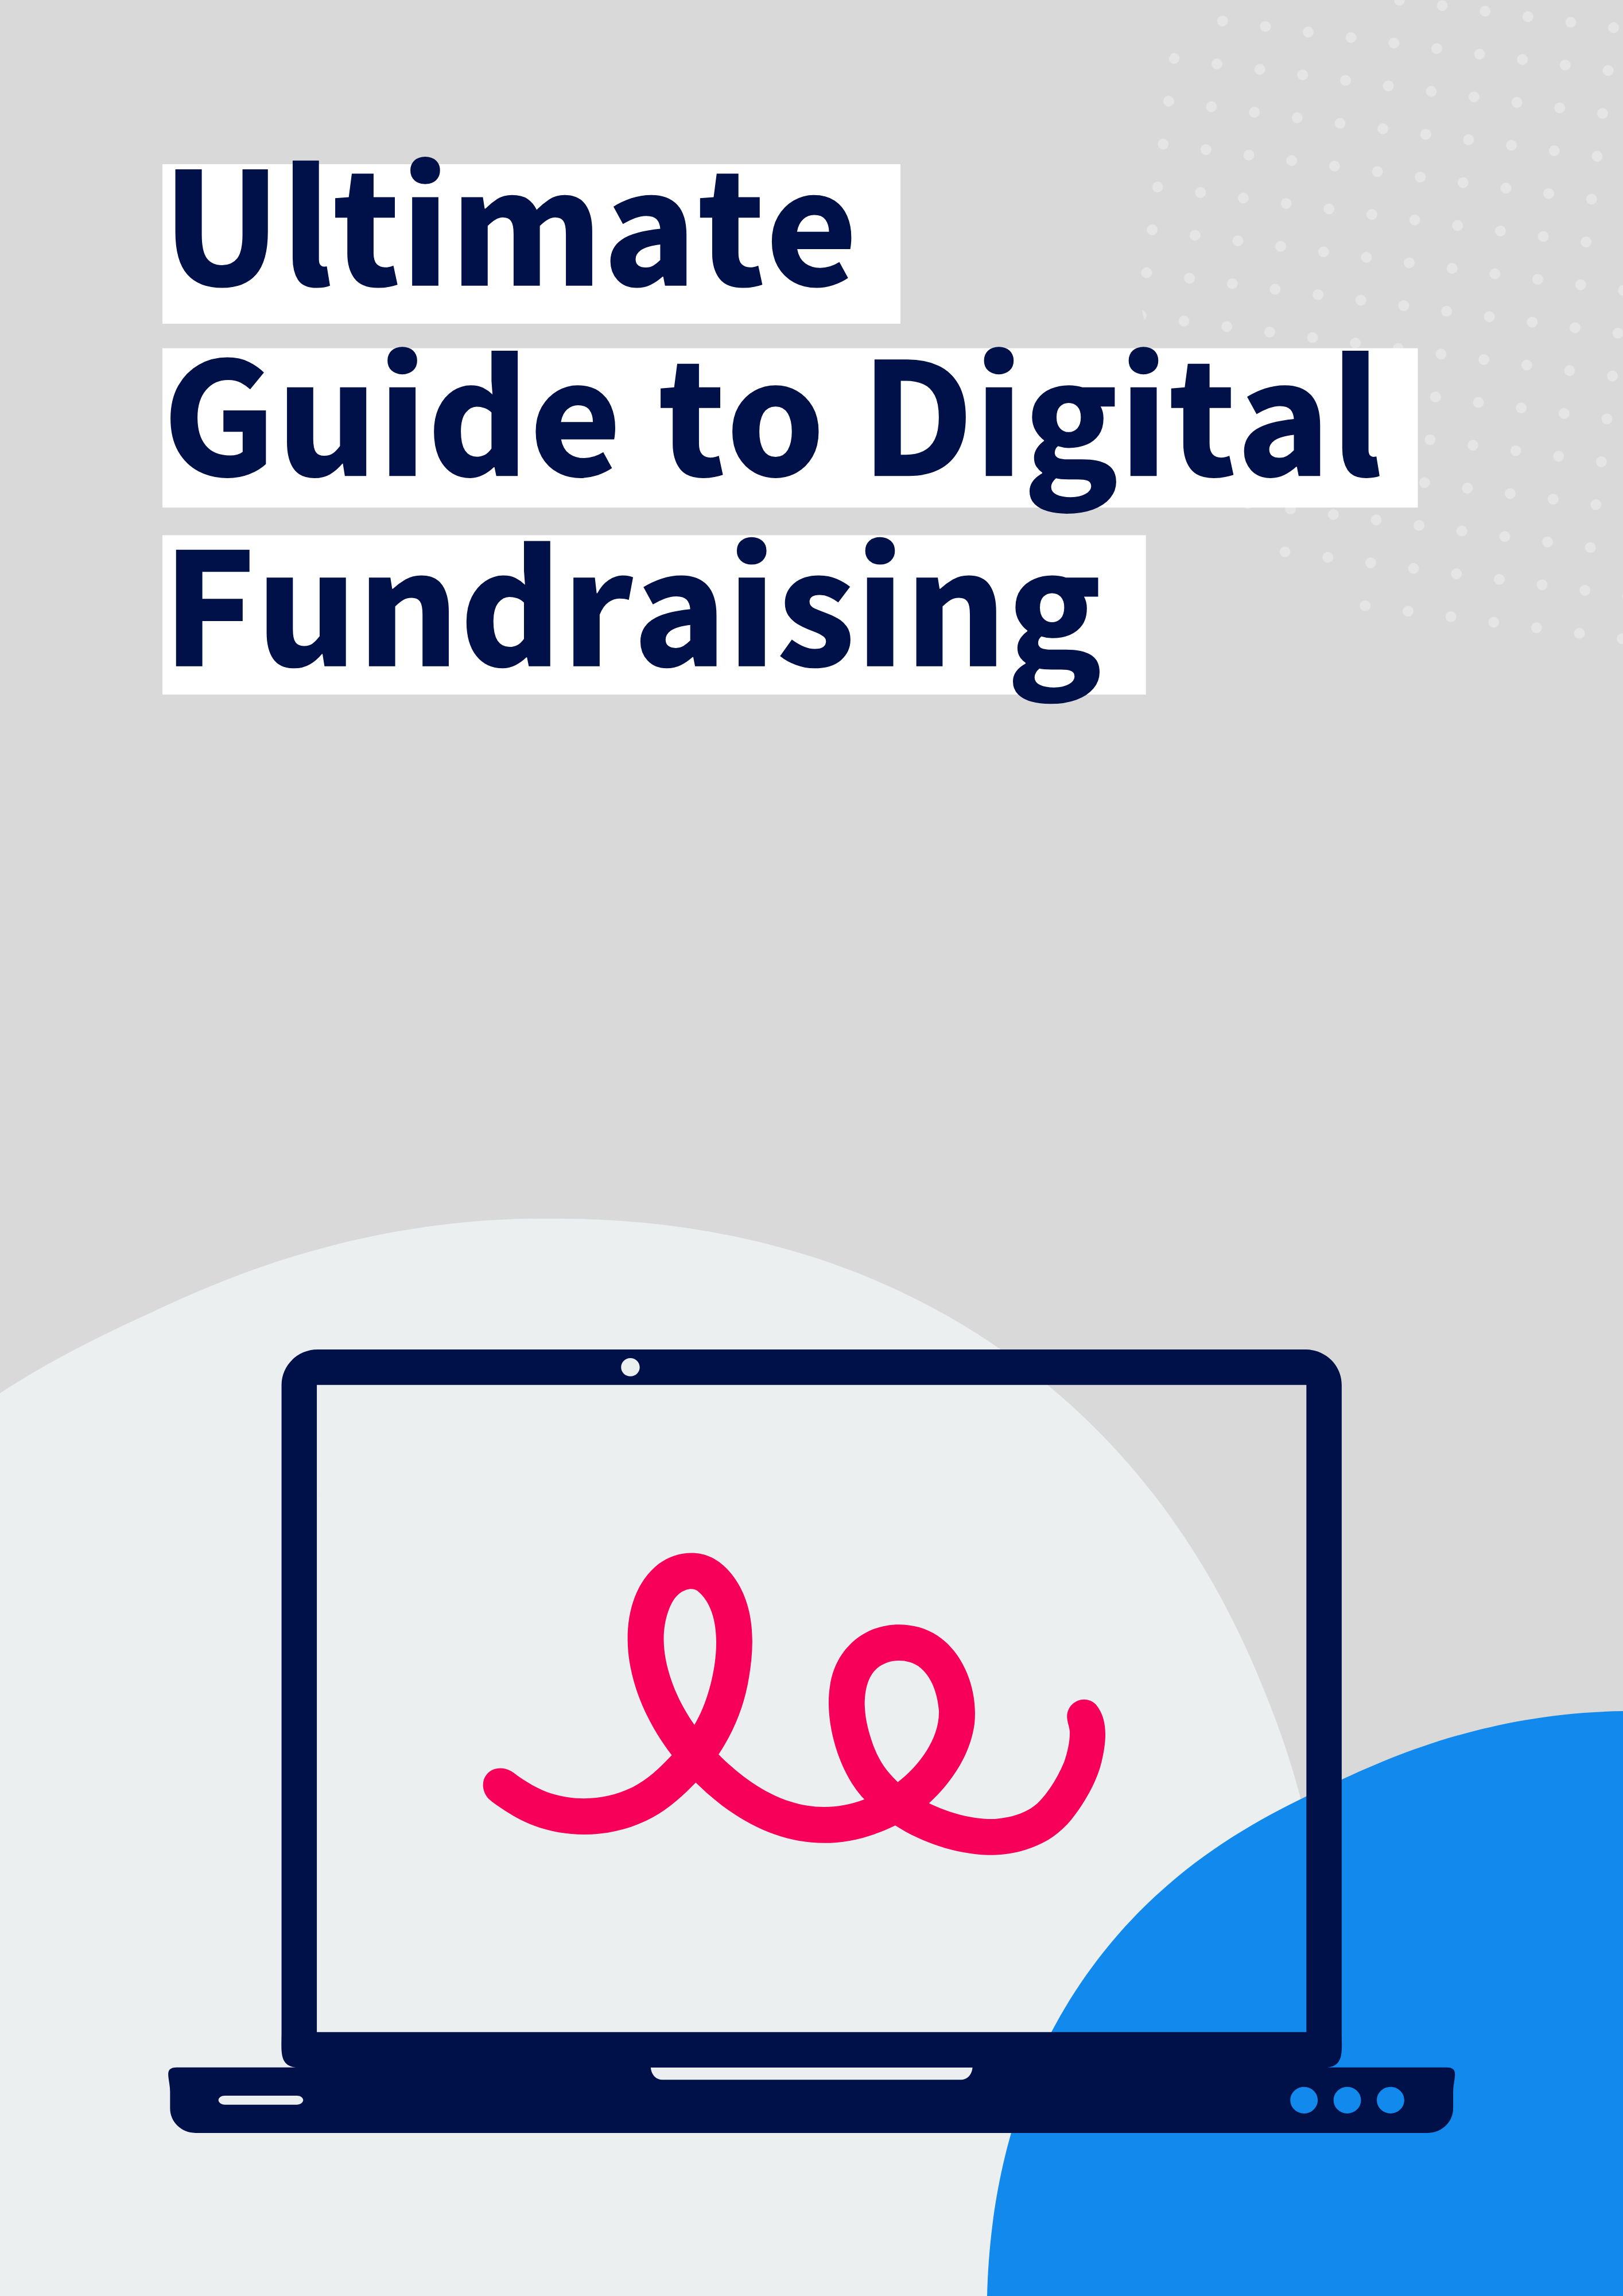 Ultimate Guide to Digital Fundraising